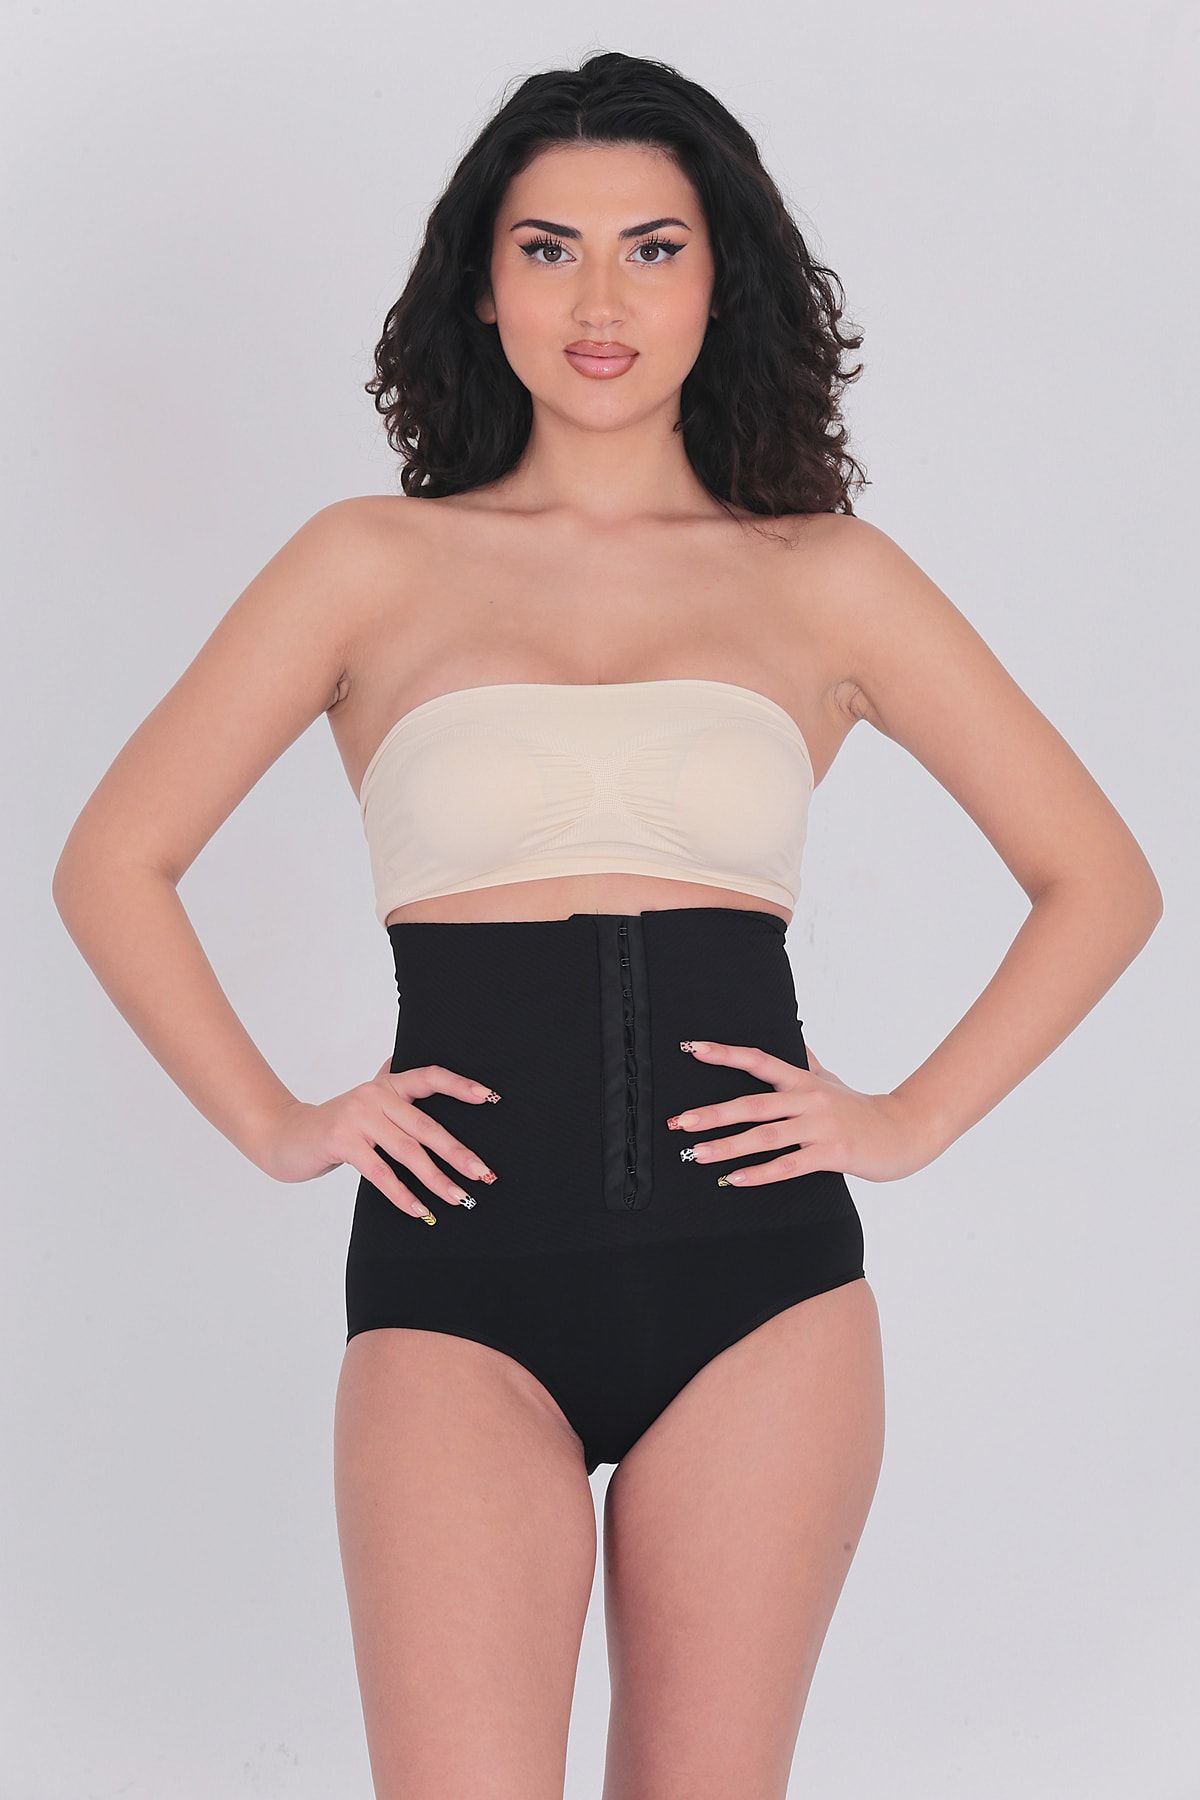 Body Shaper Women Slips For Under Dresses With Cup Corset Waist